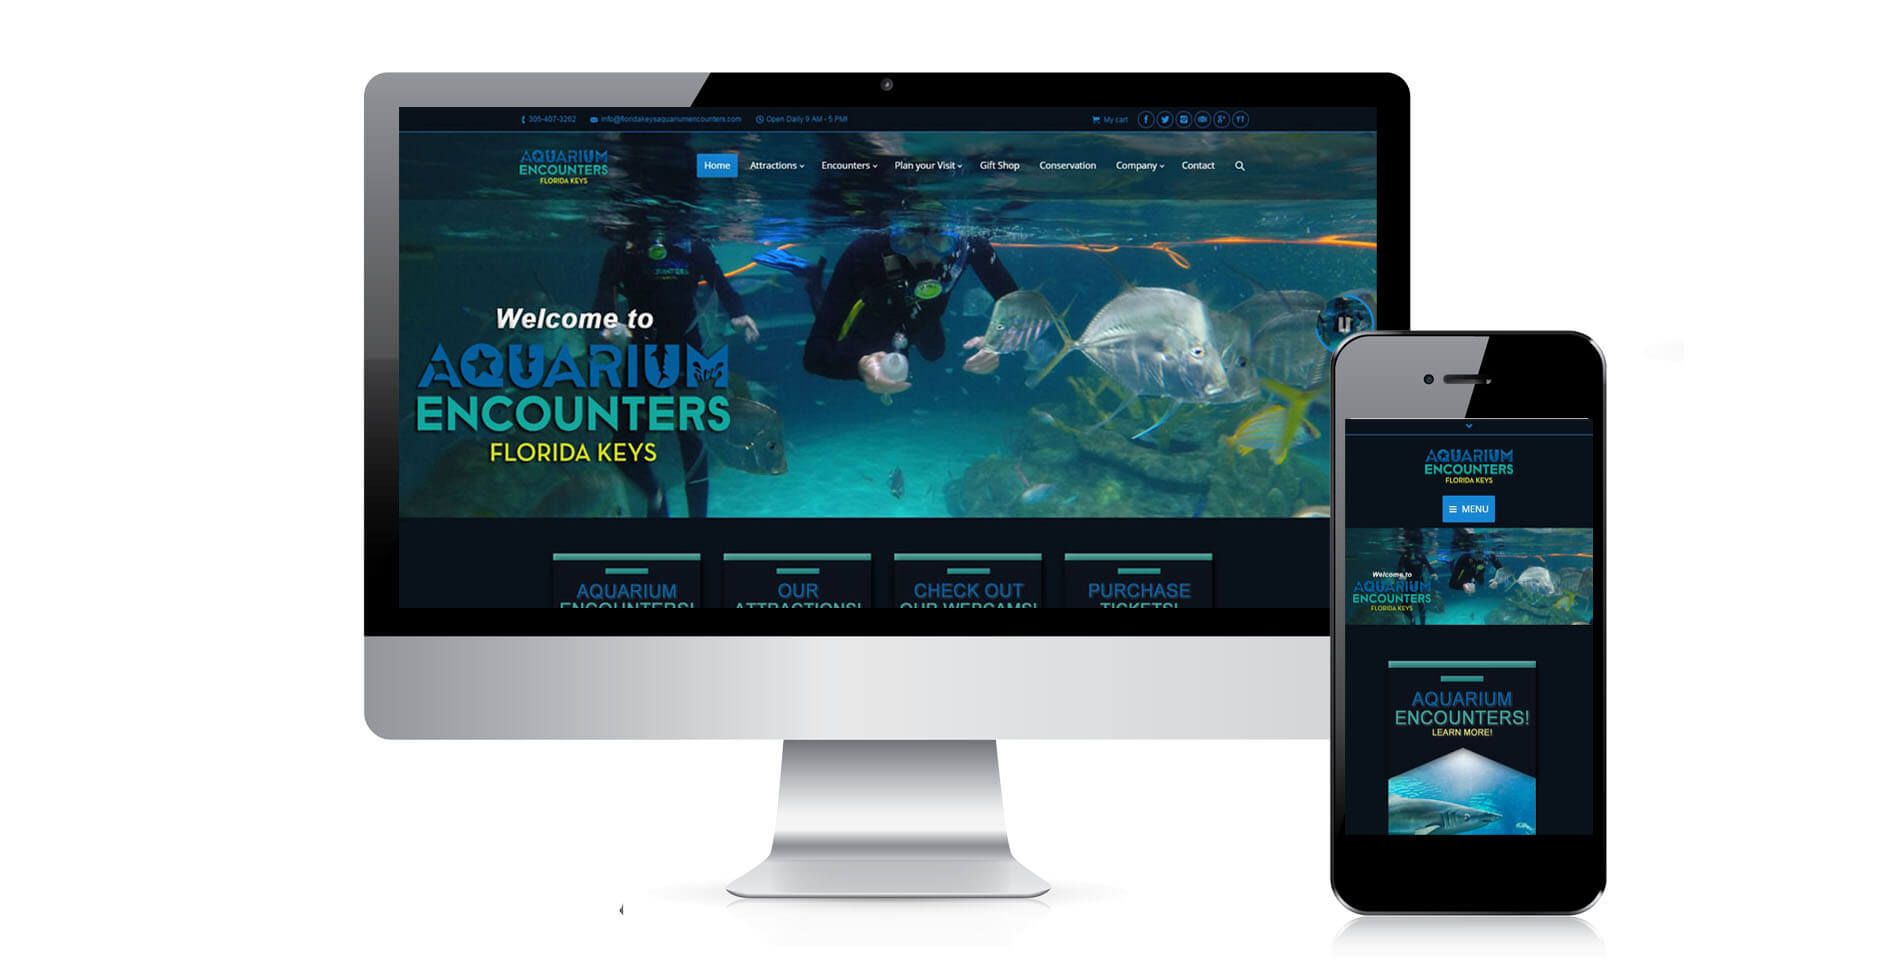 An image of the responsive design of Florida Keys Aquarium Encounters, website created by Not Fade Away Marketing